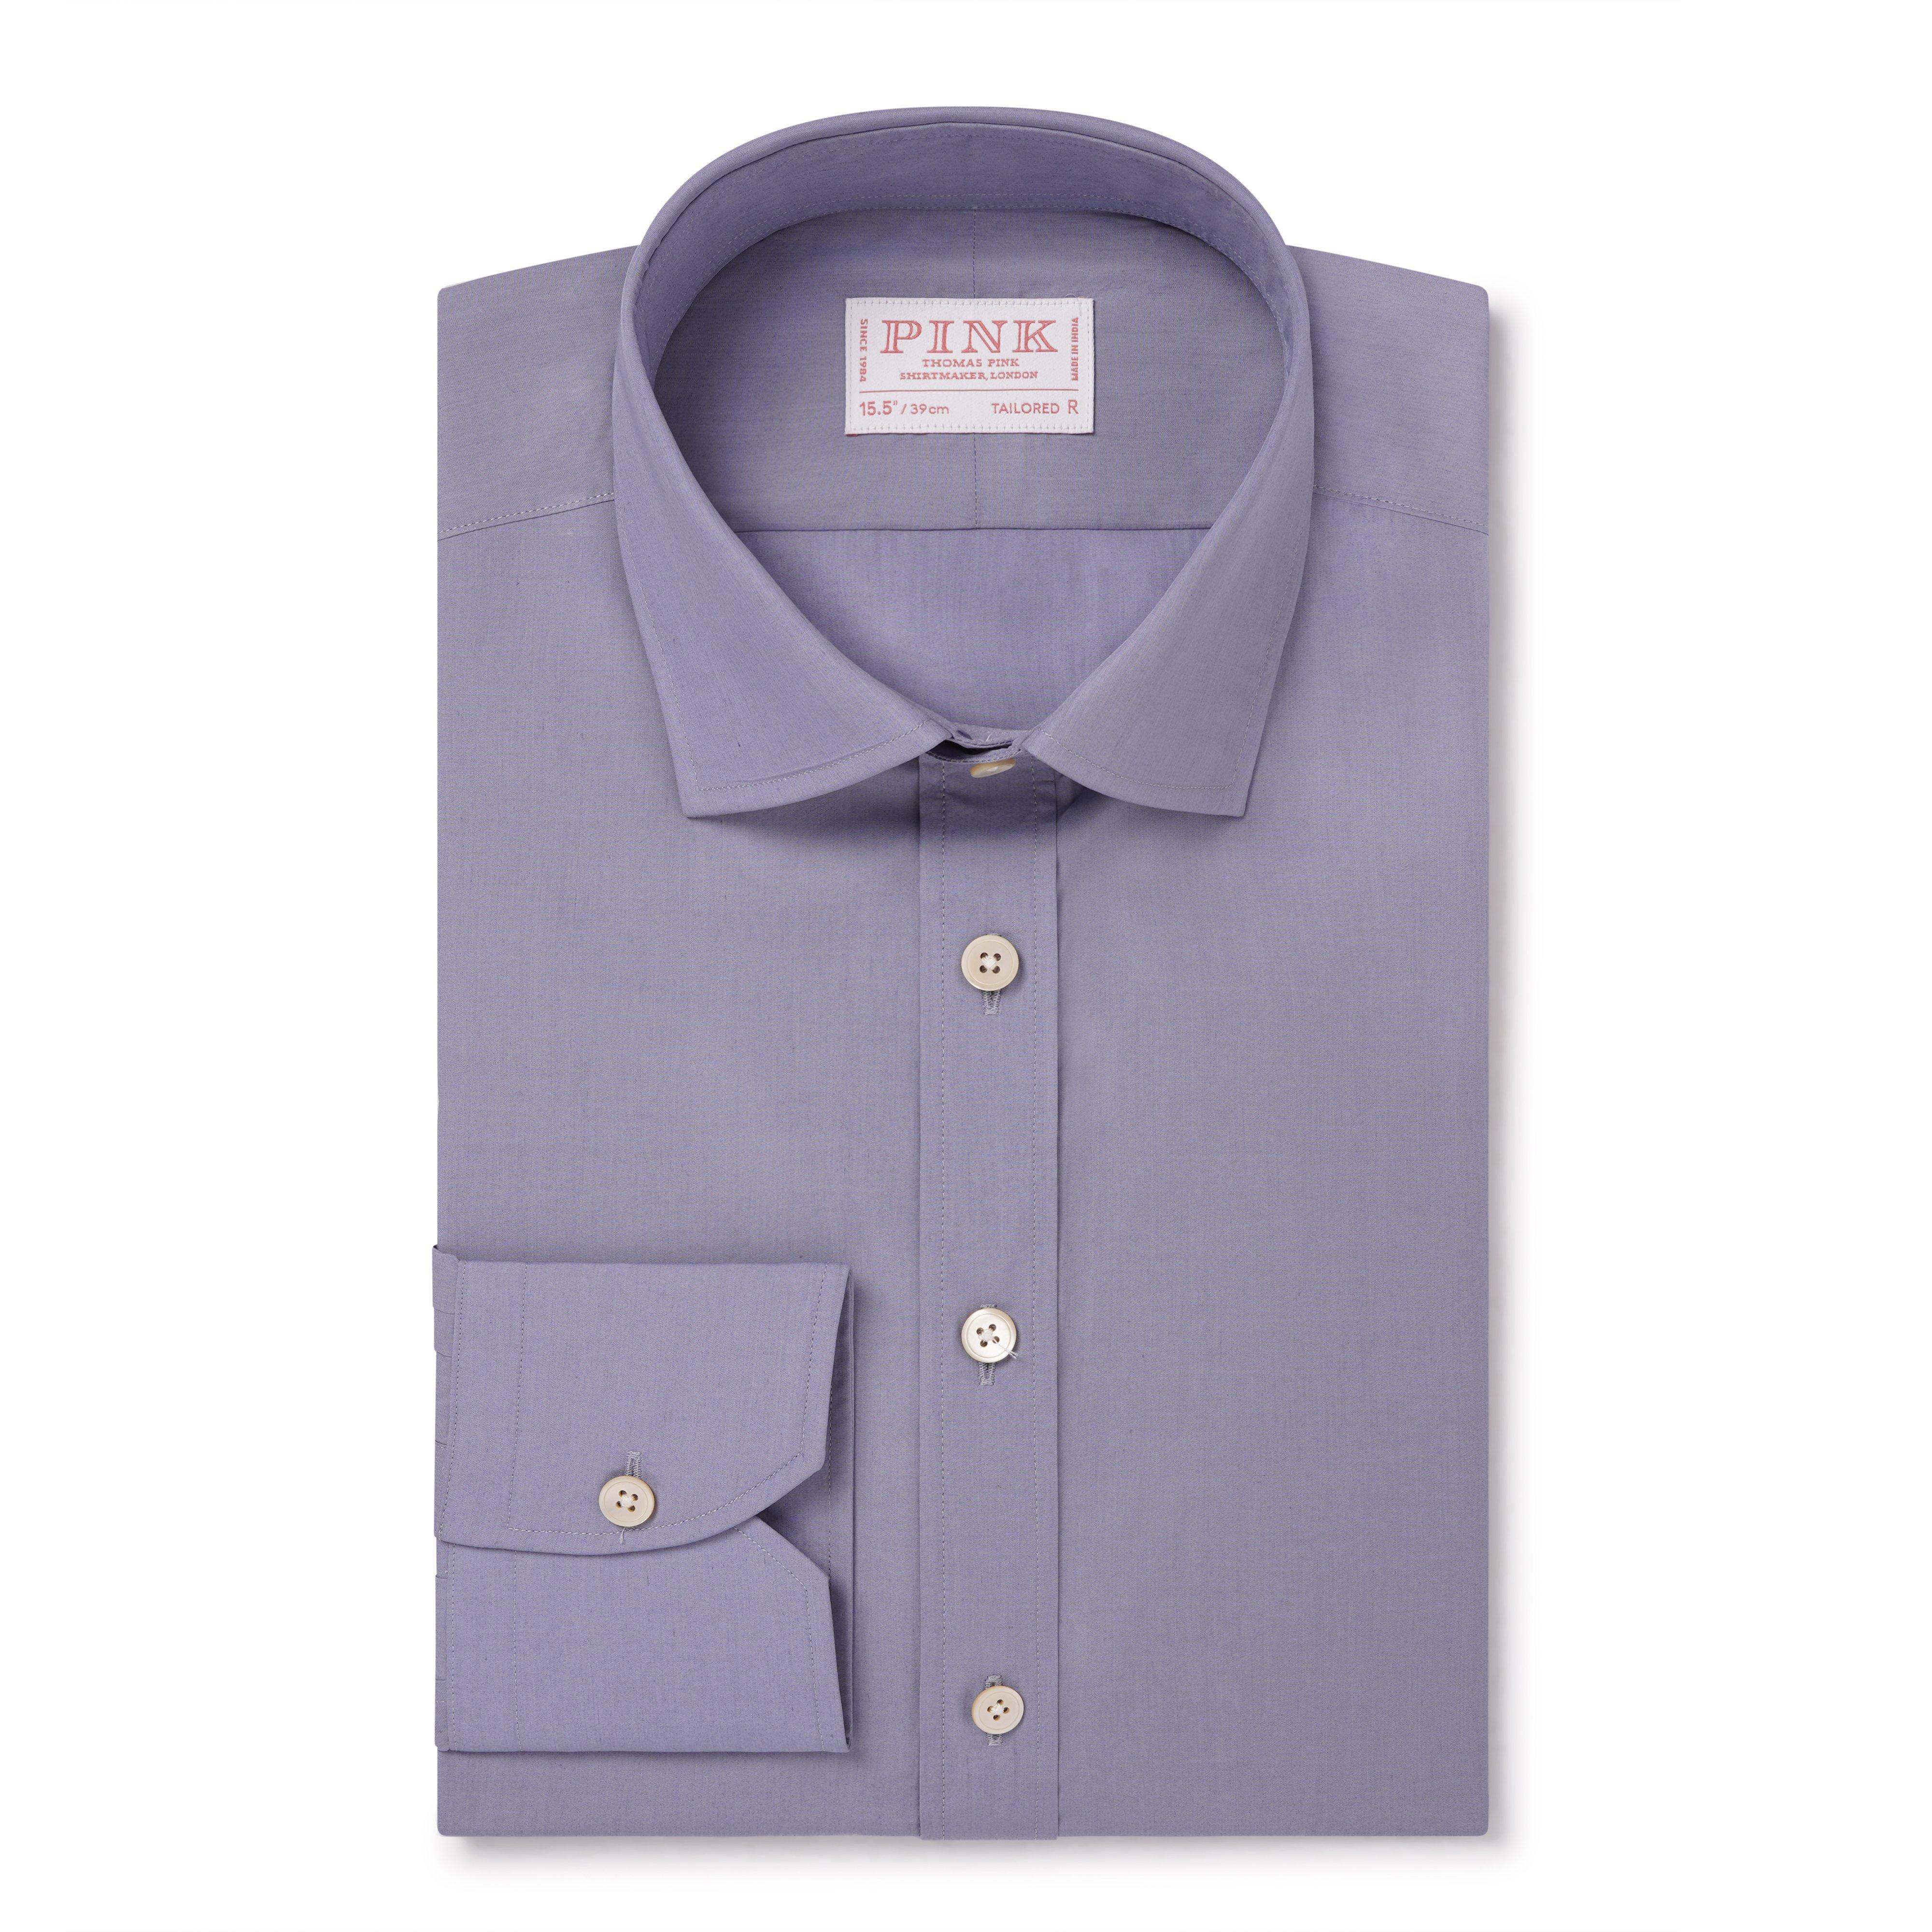 Thomas Pink Masters the Modern Shirt & Tie Combo for Fall/Winter